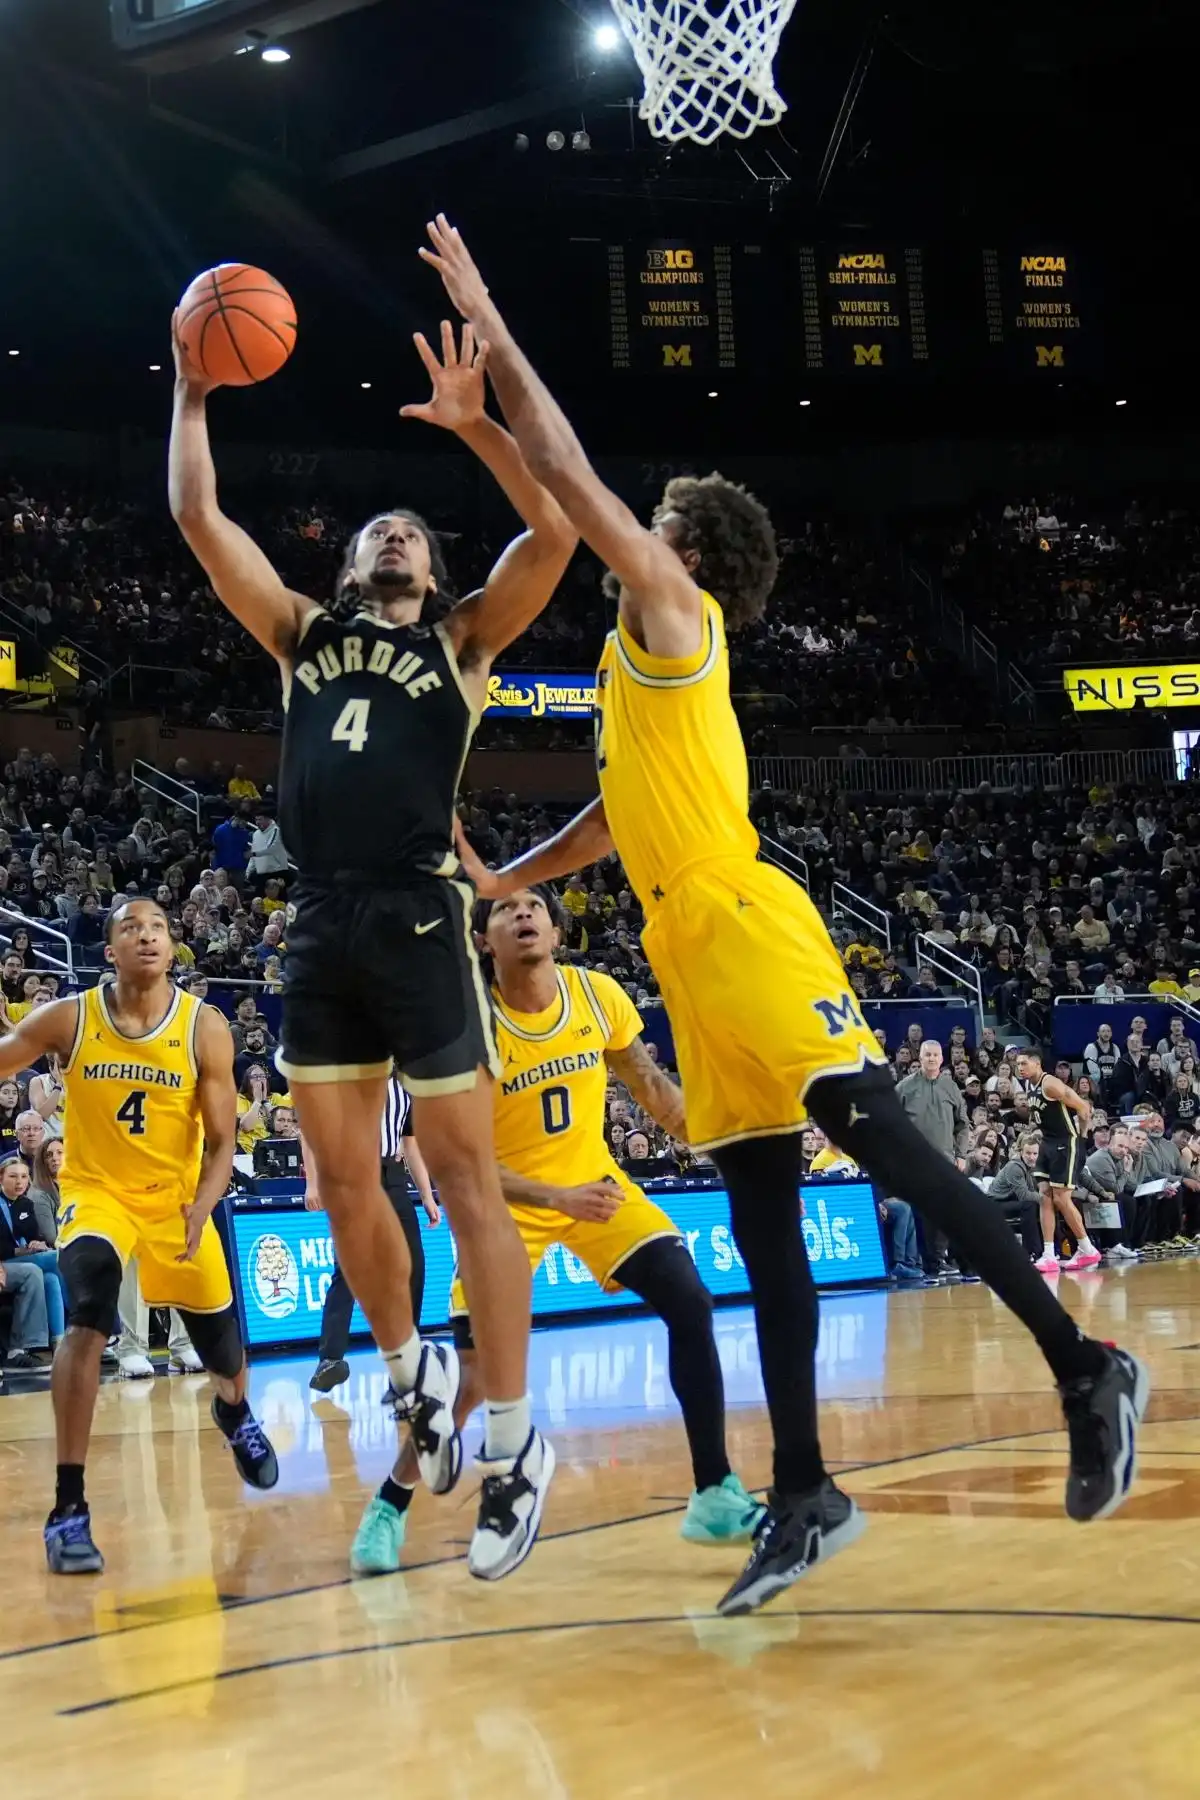 Purdue takeover Crisler Center true low point Michigan basketball freefall